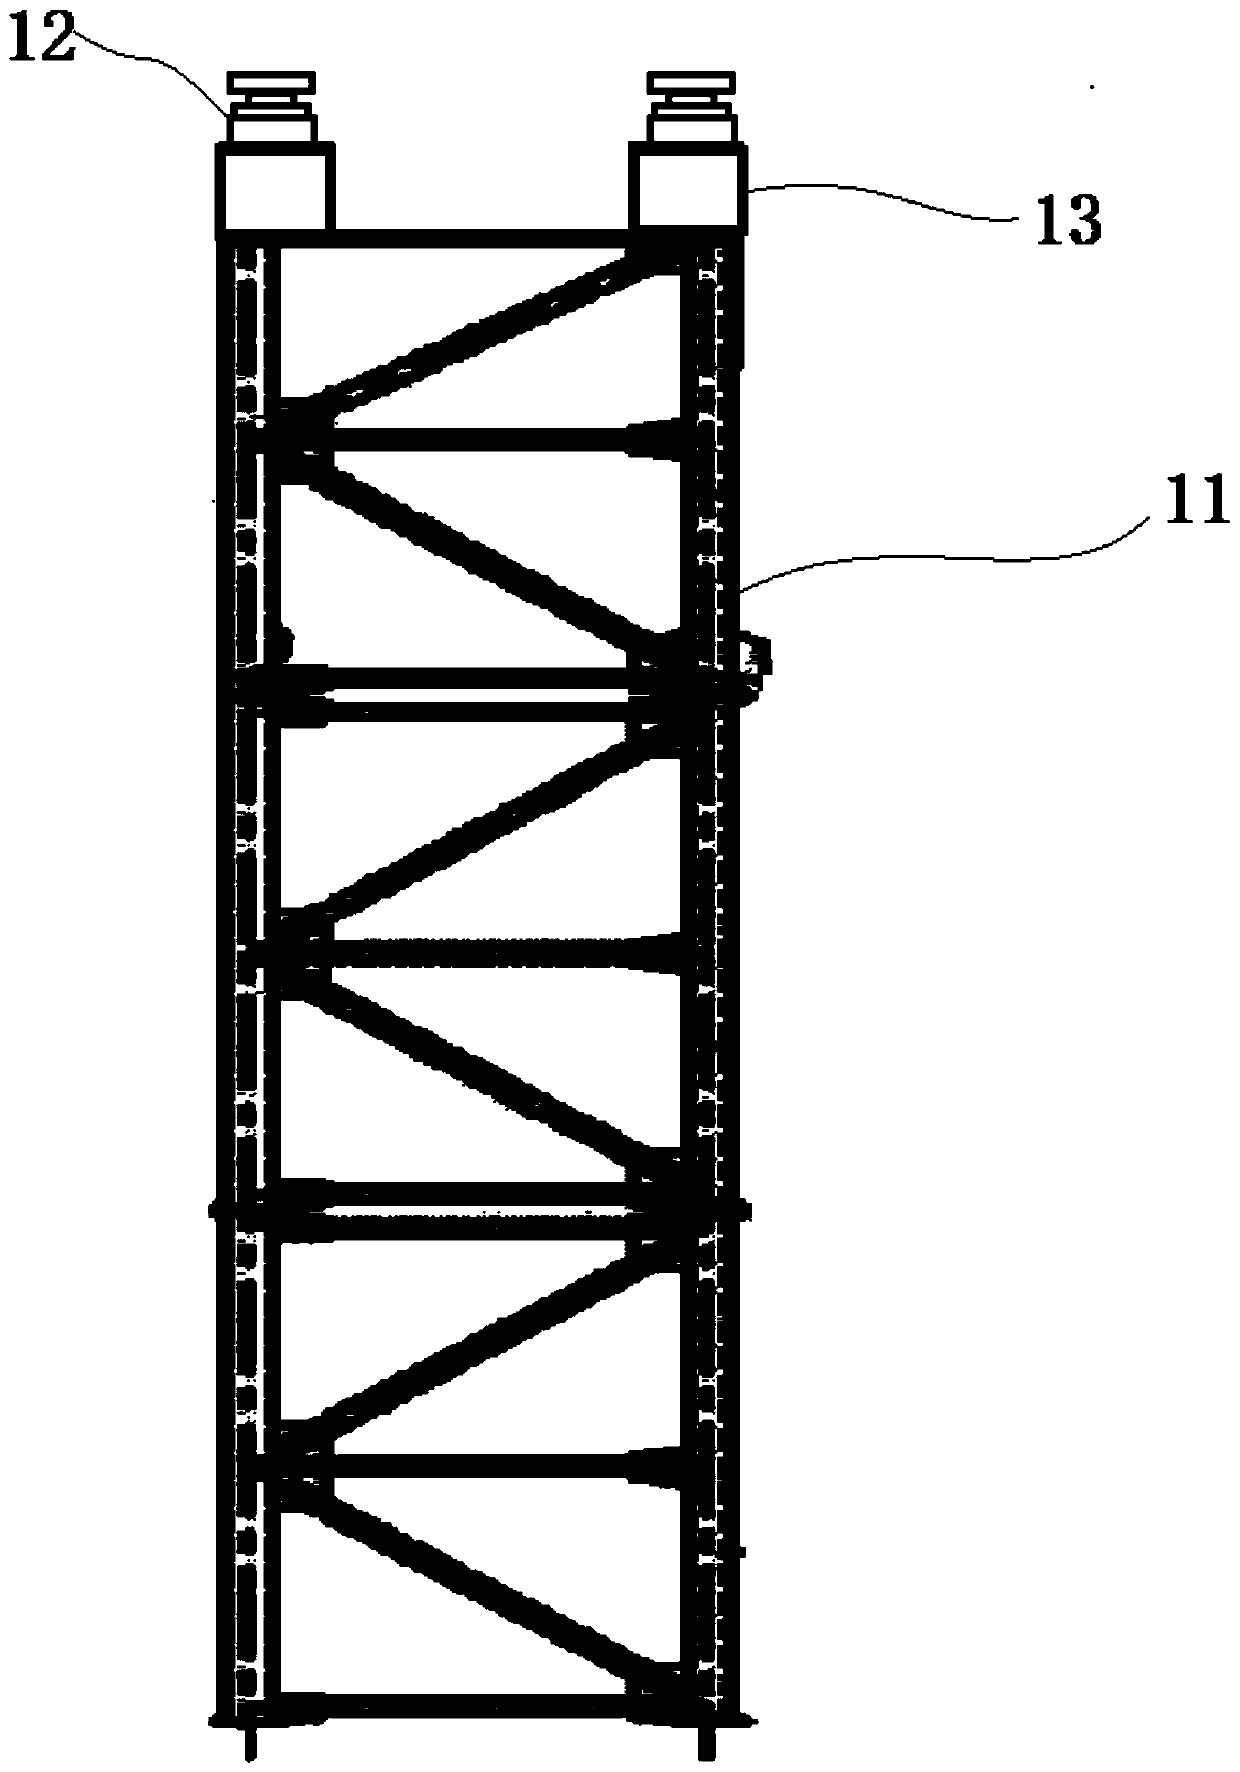 Bridge temporary support and construction method